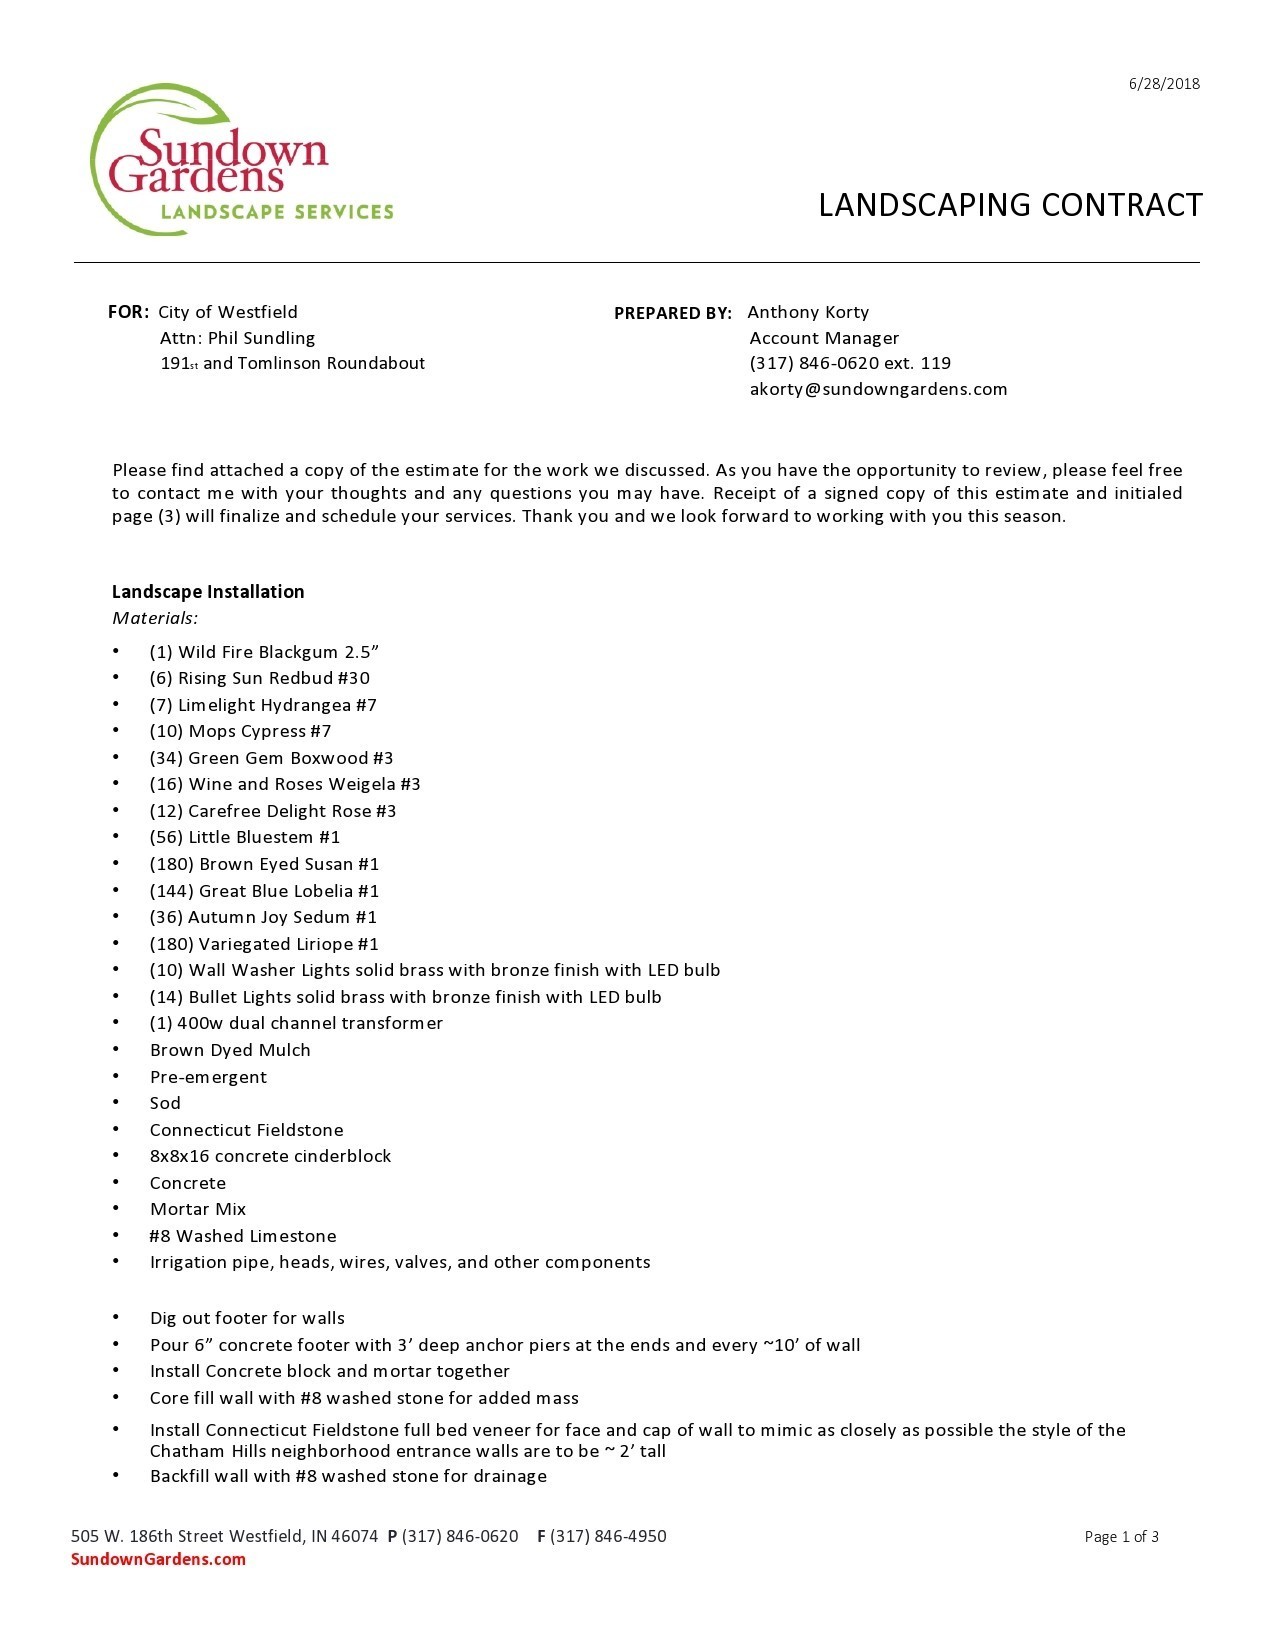 Free landscaping contract template 39